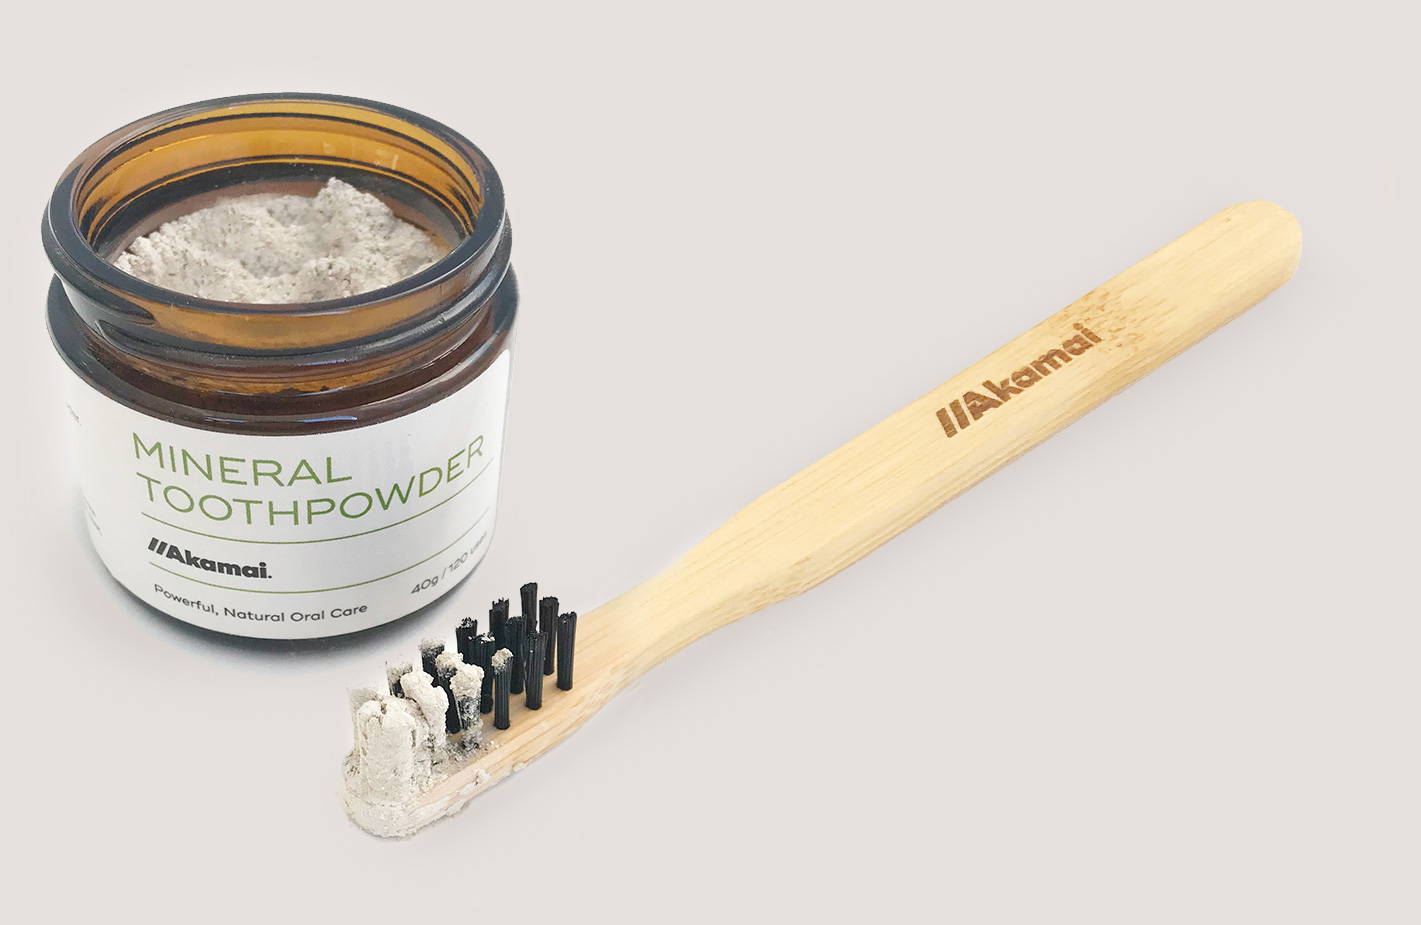 Mineral Toothpowder Jar with Toothbrush